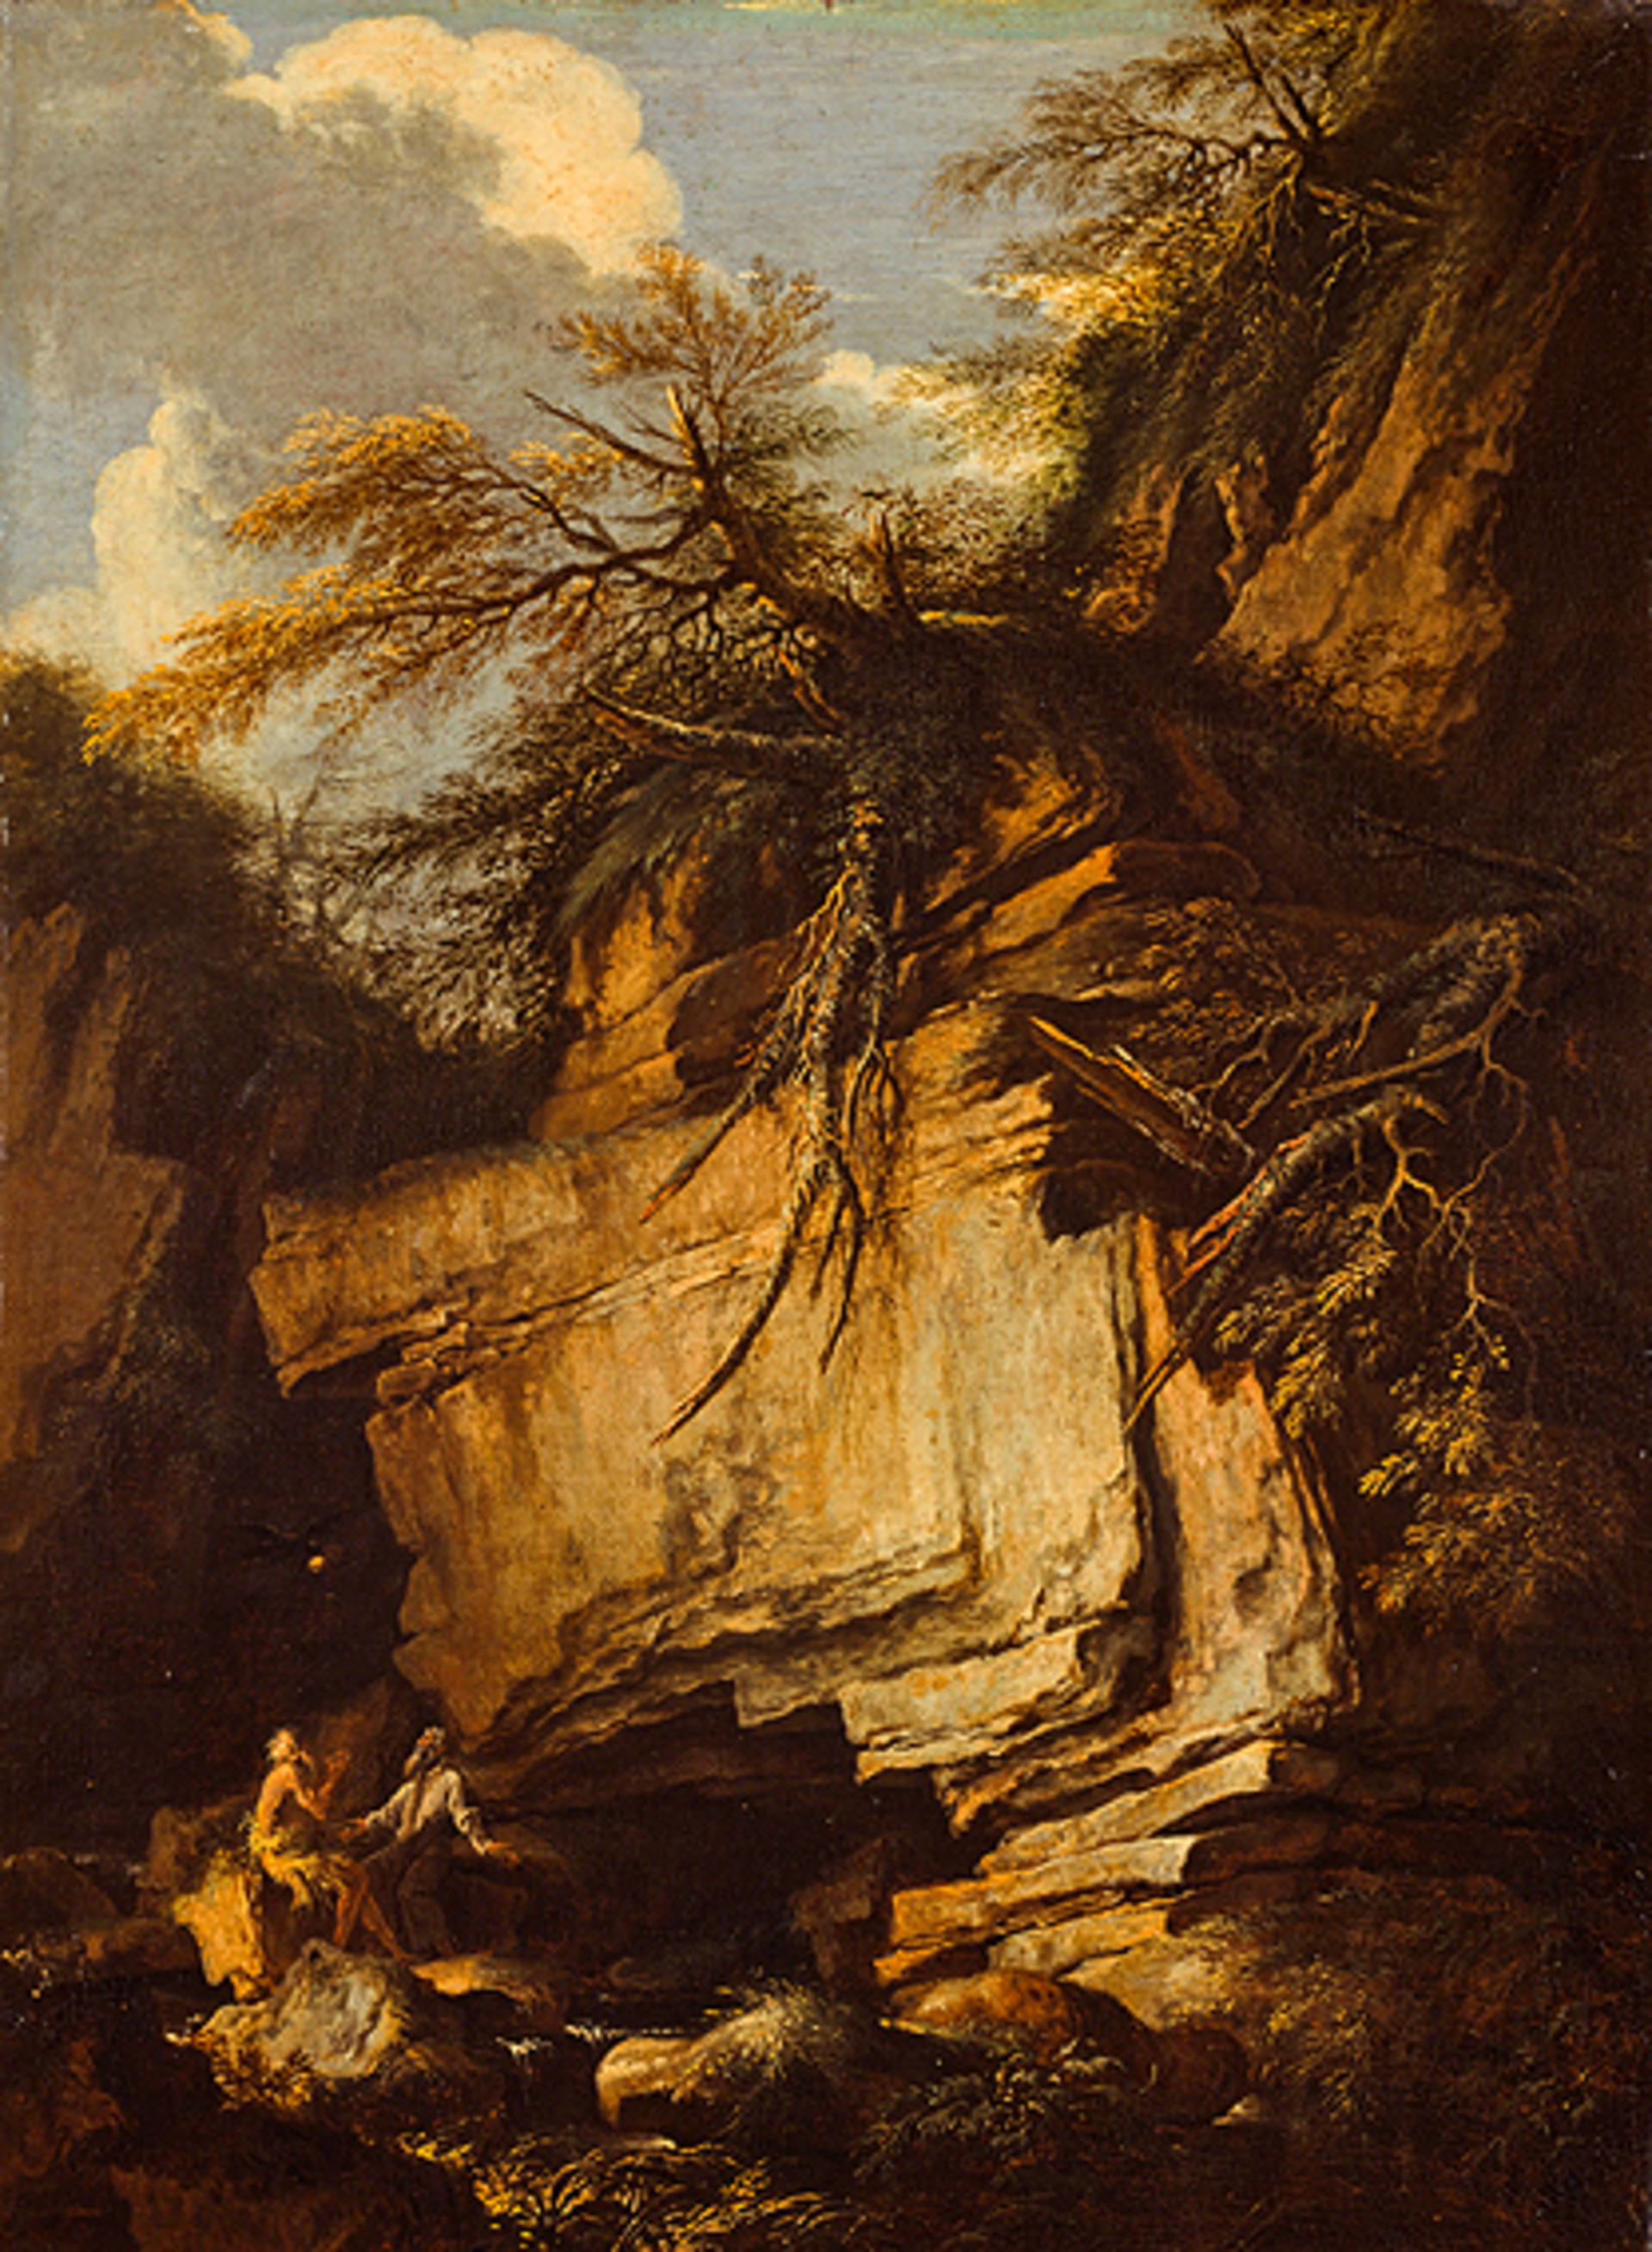 Rosa-1665-ca-Landscape-with-Saint-Anthony-Abbot-and-Saint-Paul-the-Hermit-National-Gallery-Scotland-Edimbourg